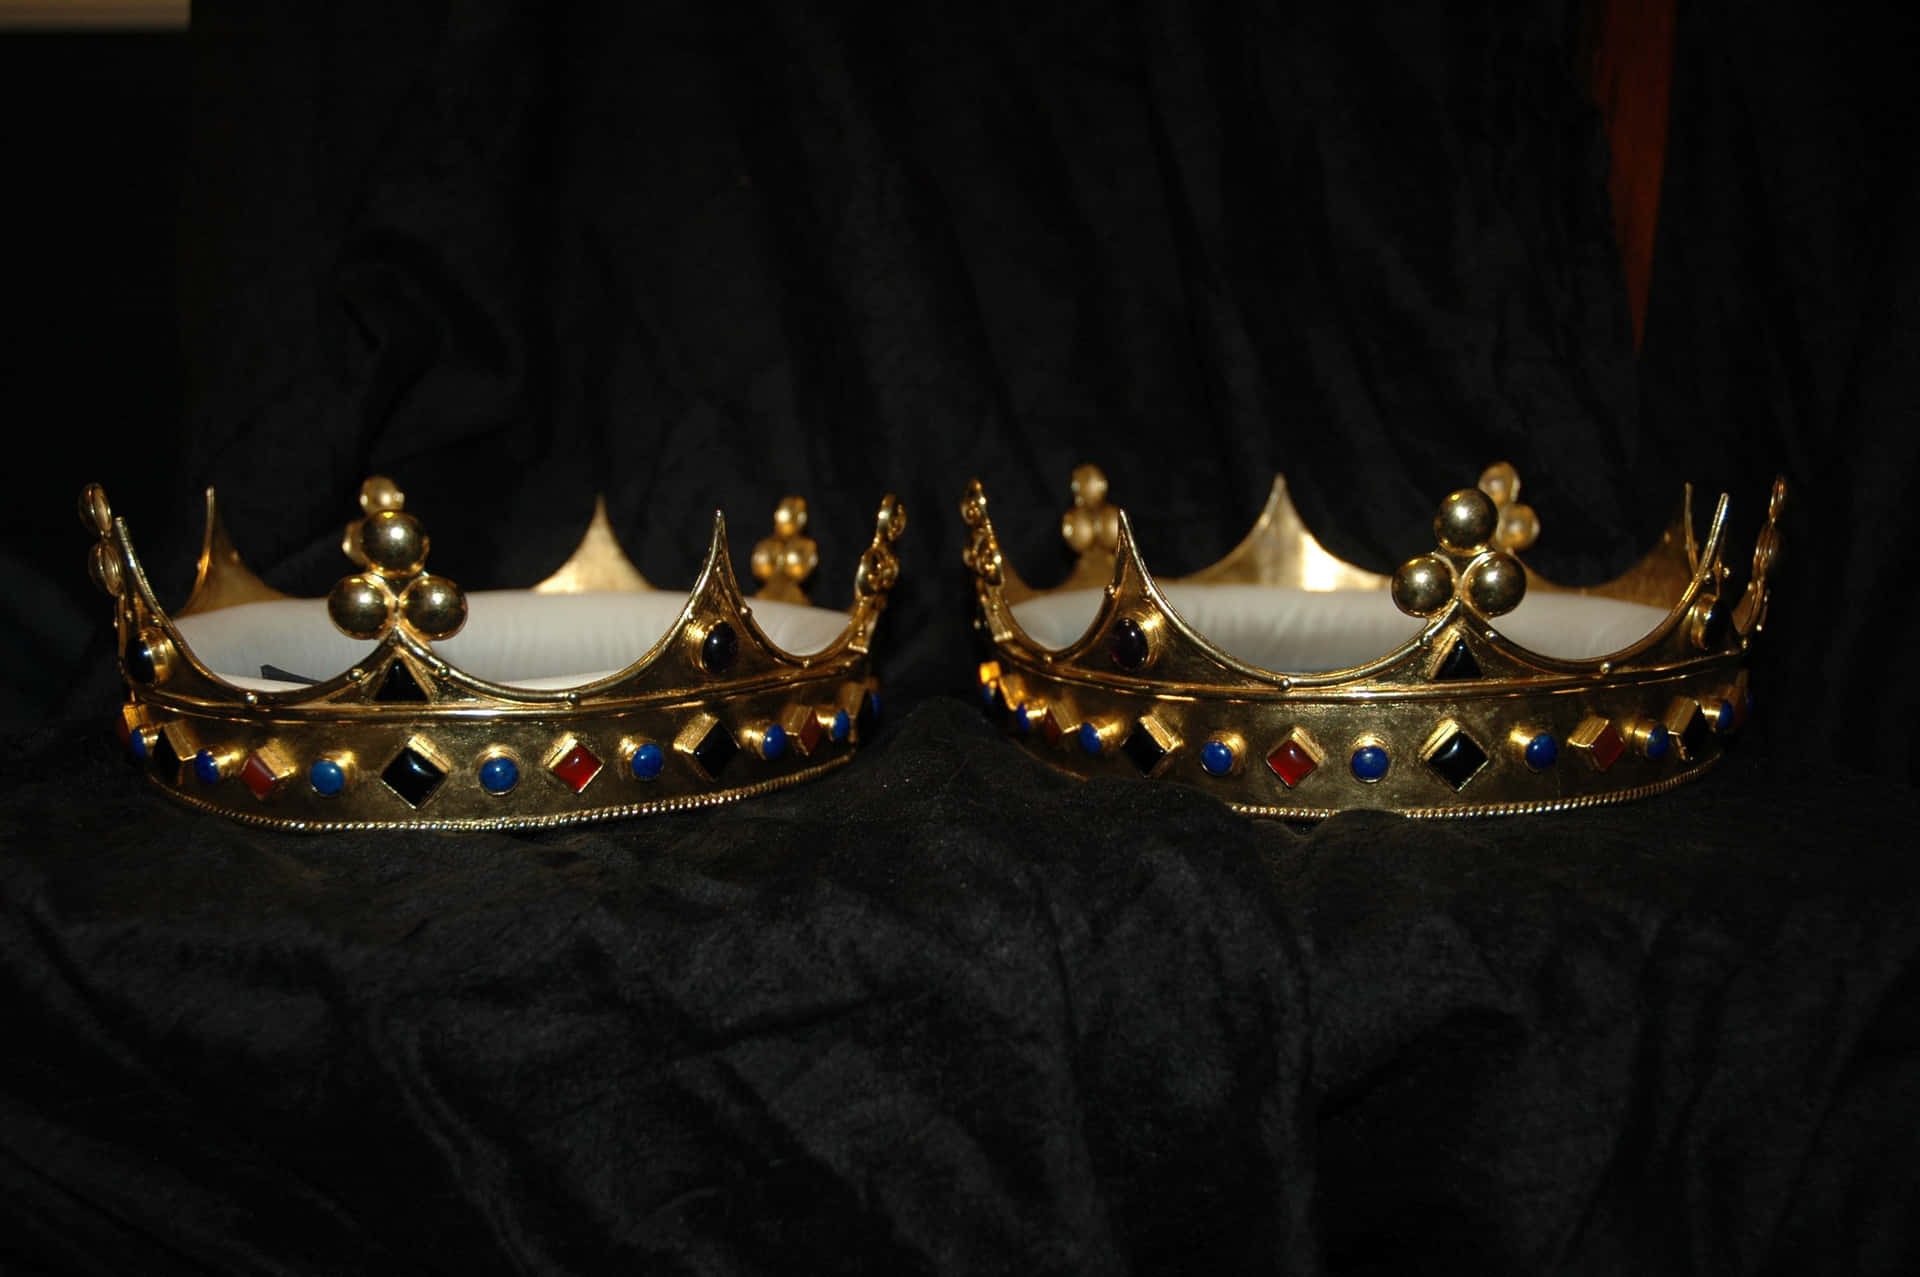 An Intricately Designed Princess Crown For Royalty Background